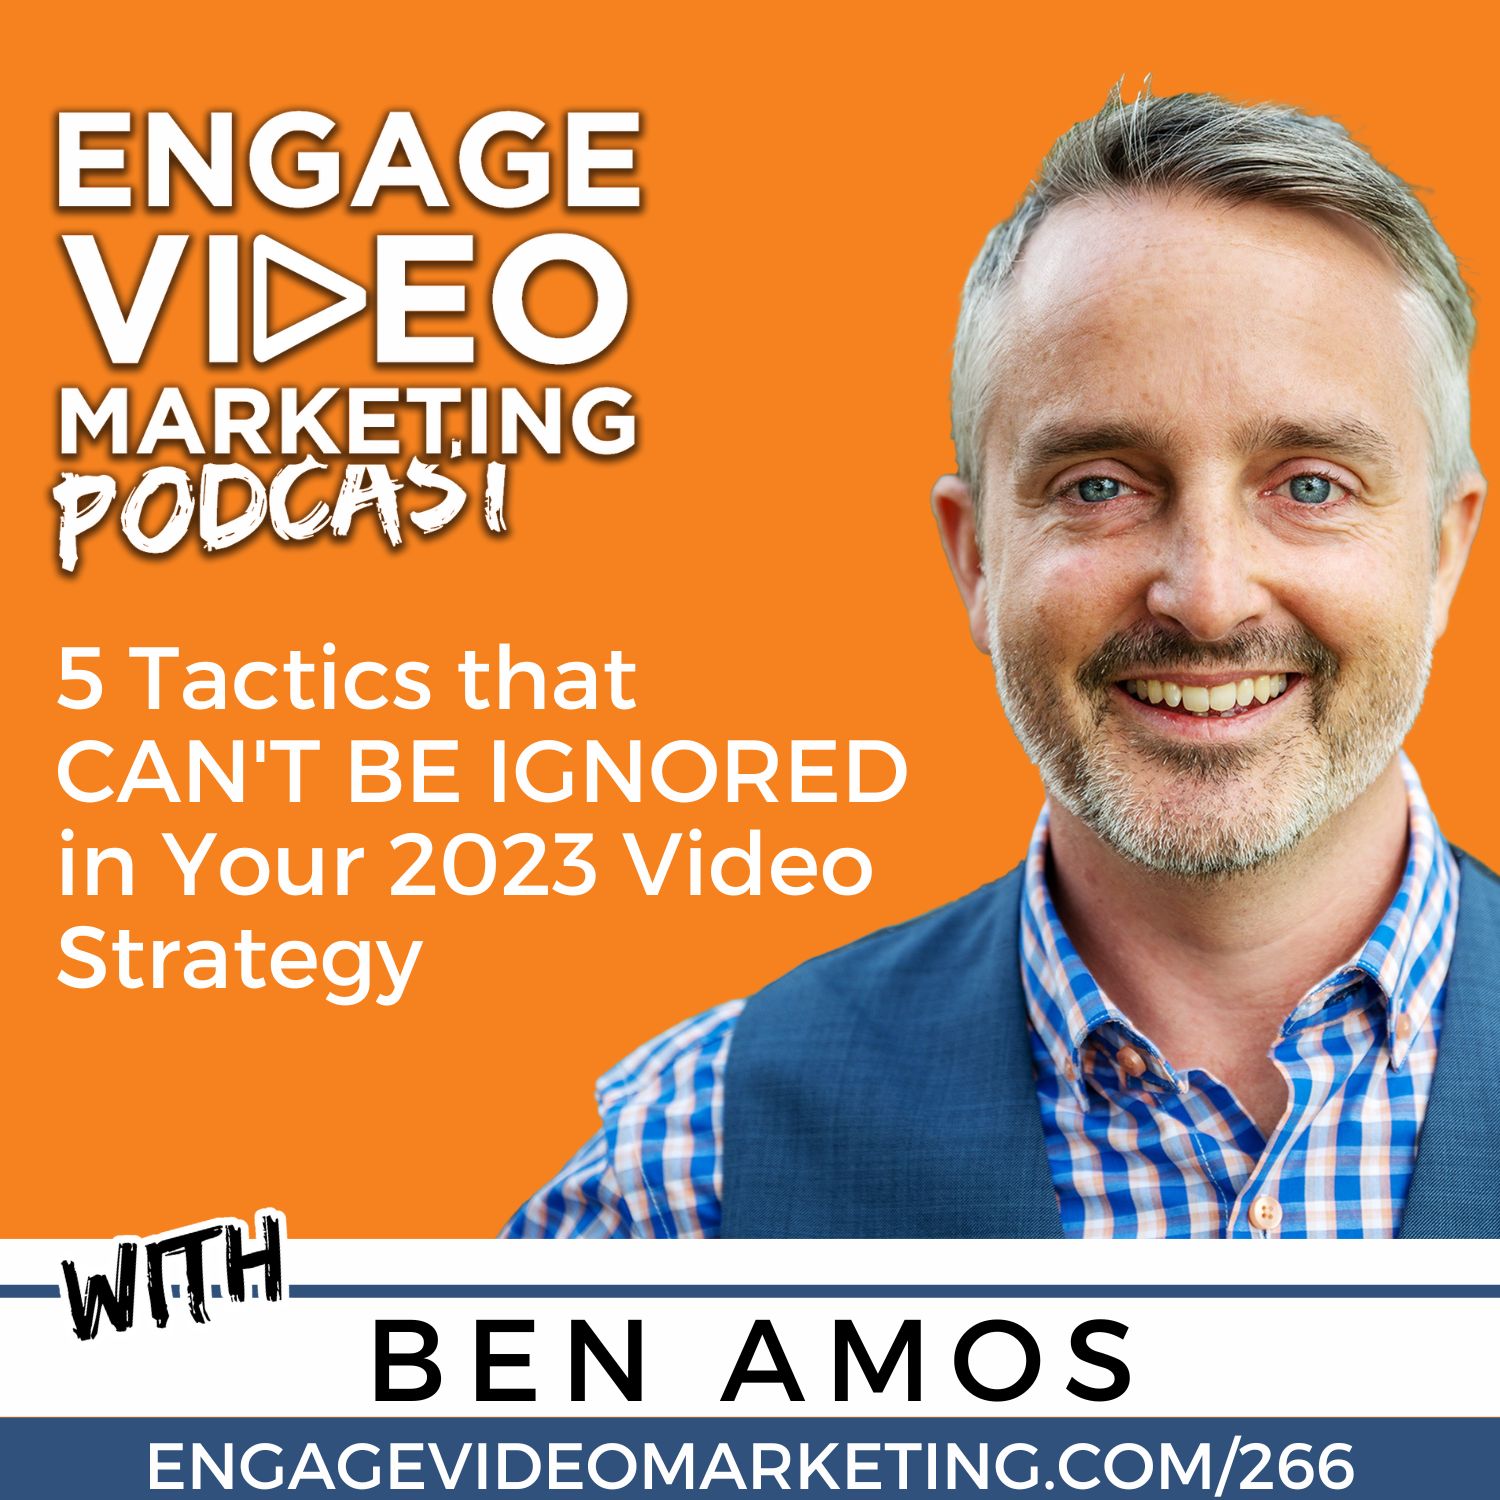 5 Tactics that CAN’T BE IGNORED in Your 2023 Video Strategy with Ben Amos